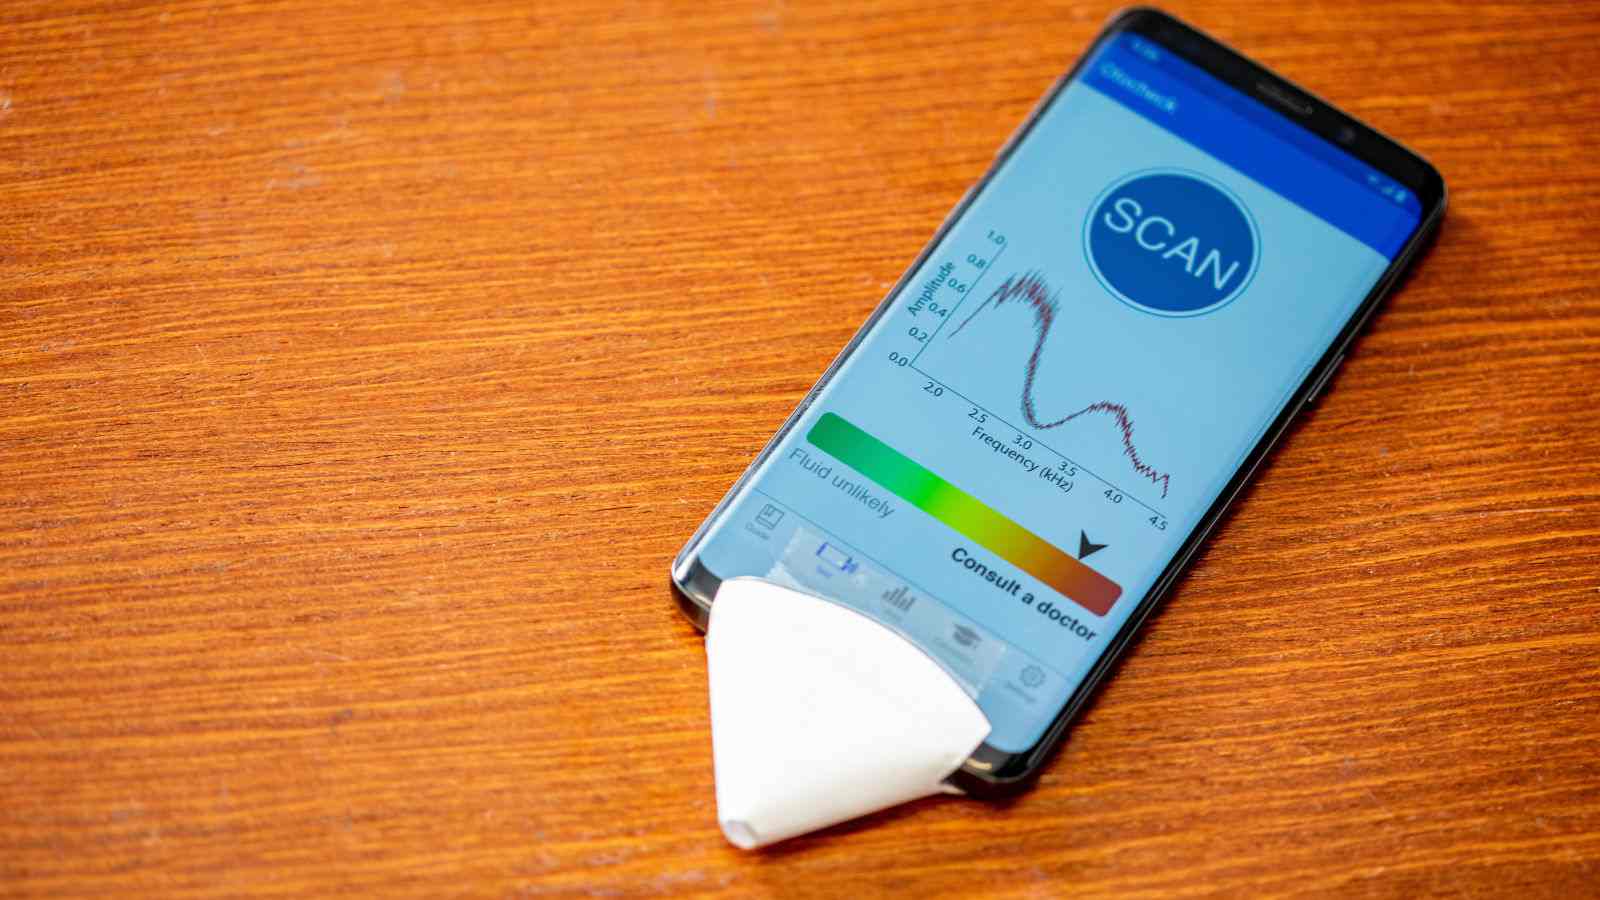 Scientists Say They've Created a Smartphone App That Can Hear Ear Infections